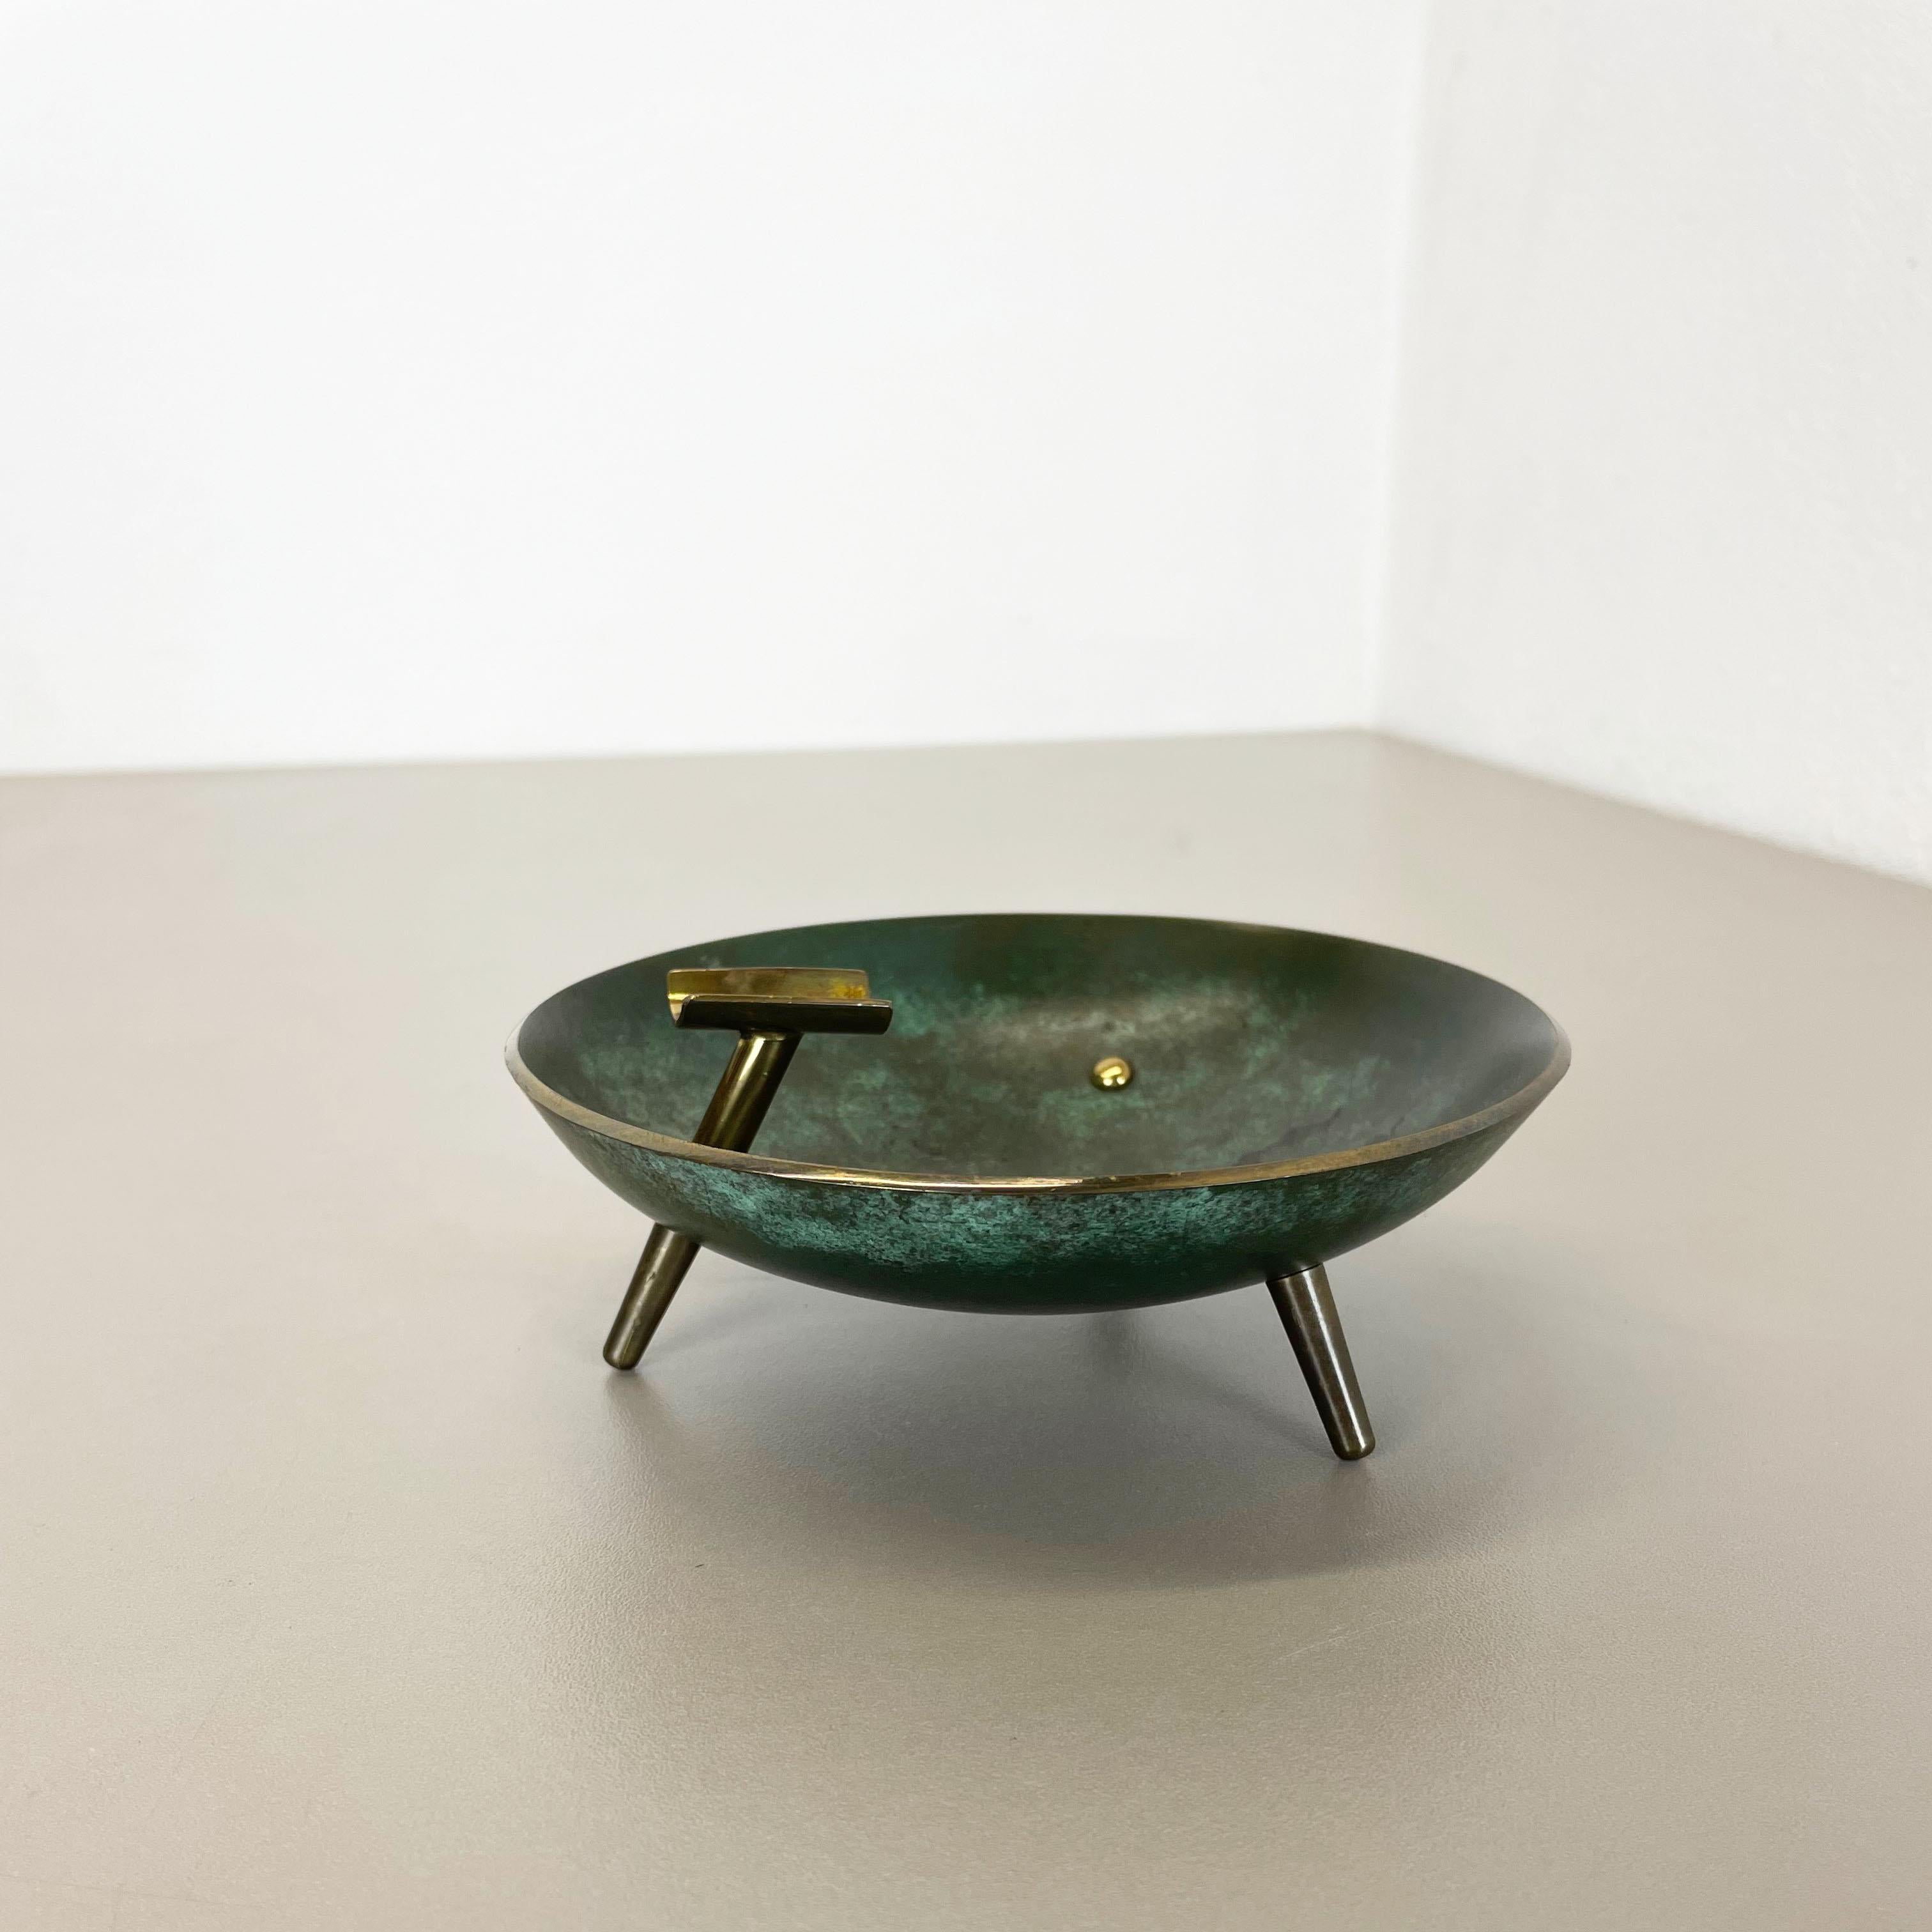 Article:

brass tripod Ashray element


Origin:

Austria


Material:

brass


Description:

Wonderful metal ashtray element made in Austria in the 1950. High quality 1950s Austrian handmade fabrication of solid brass which is